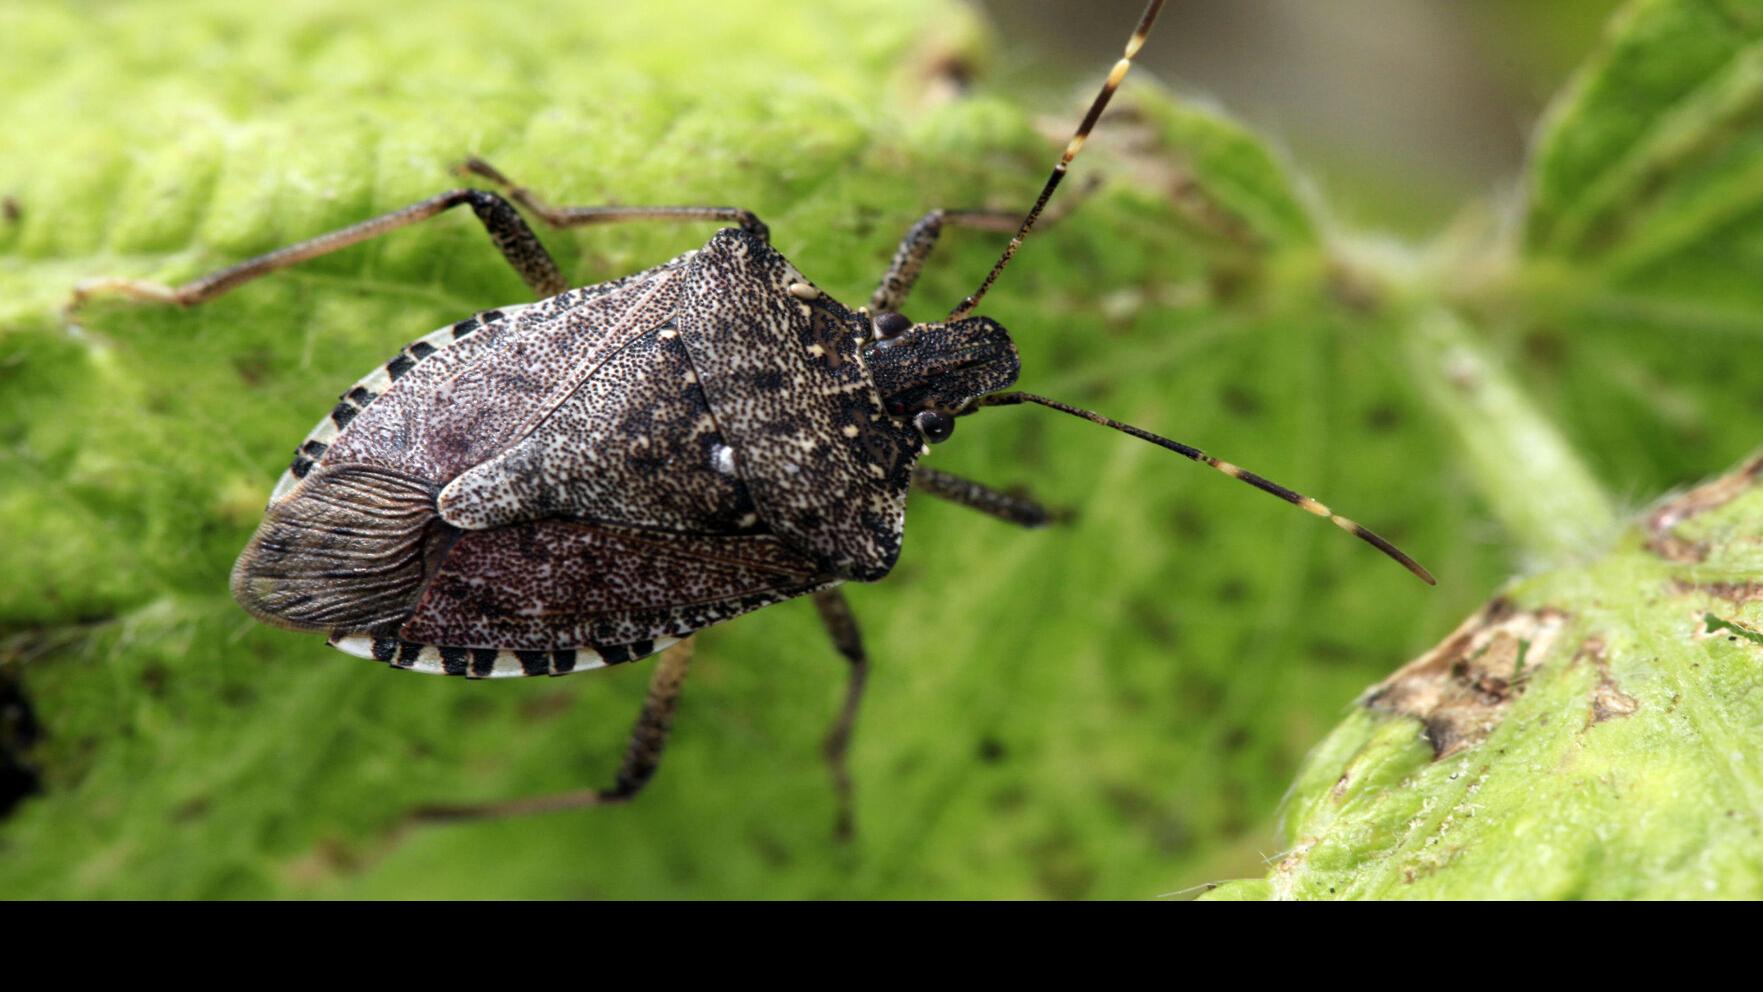 Brown marmorated stink bug a nuisance to homeowners, Illinois Extension